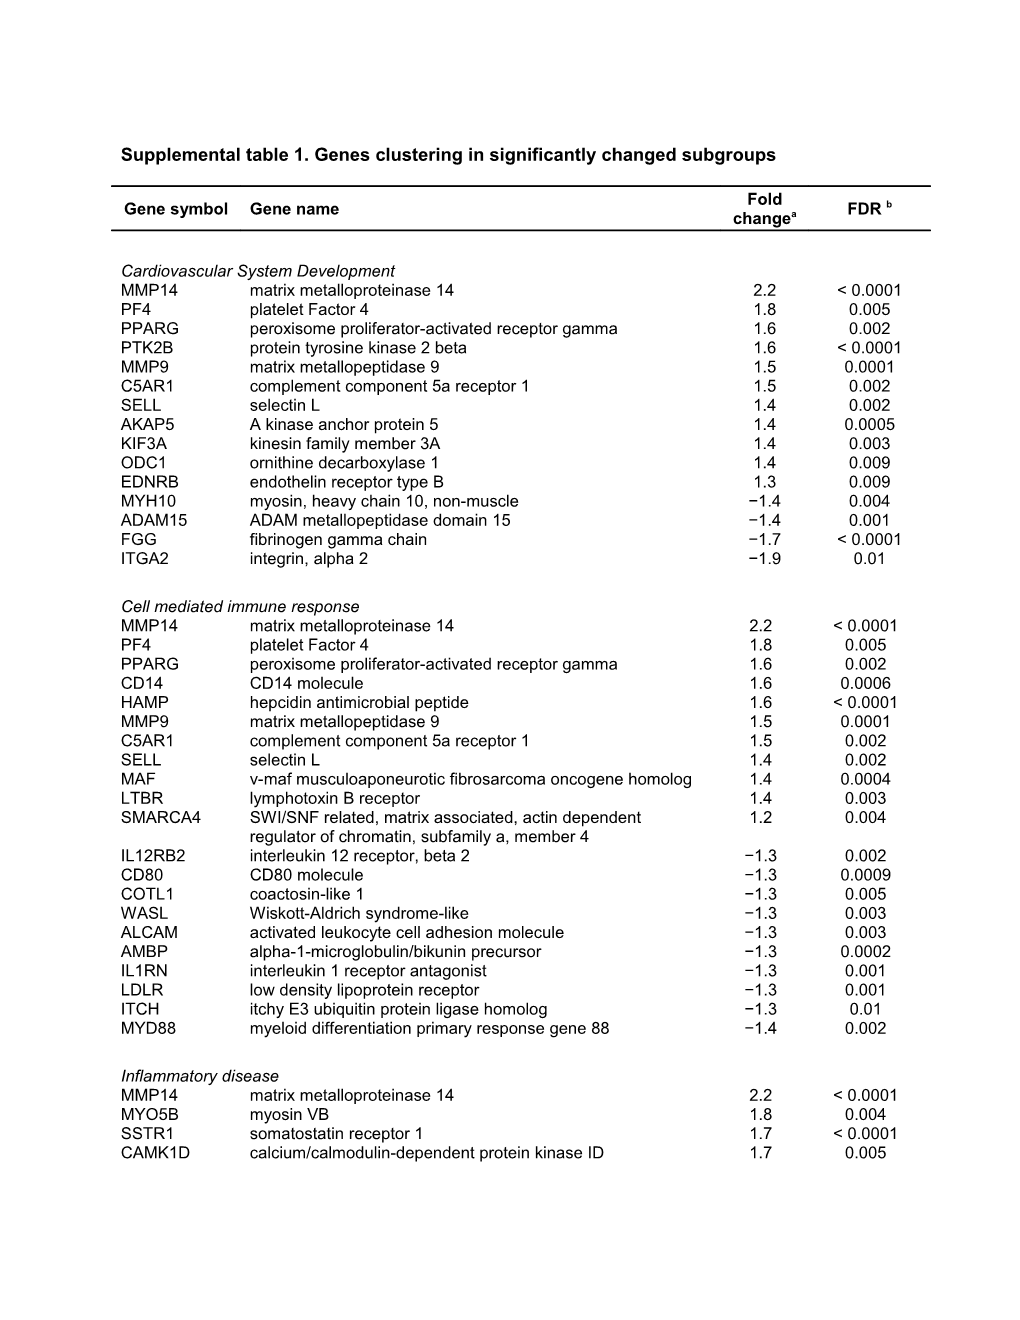 Supplemental Table 1. Genes Clustering in Significantly Changed Subgroups